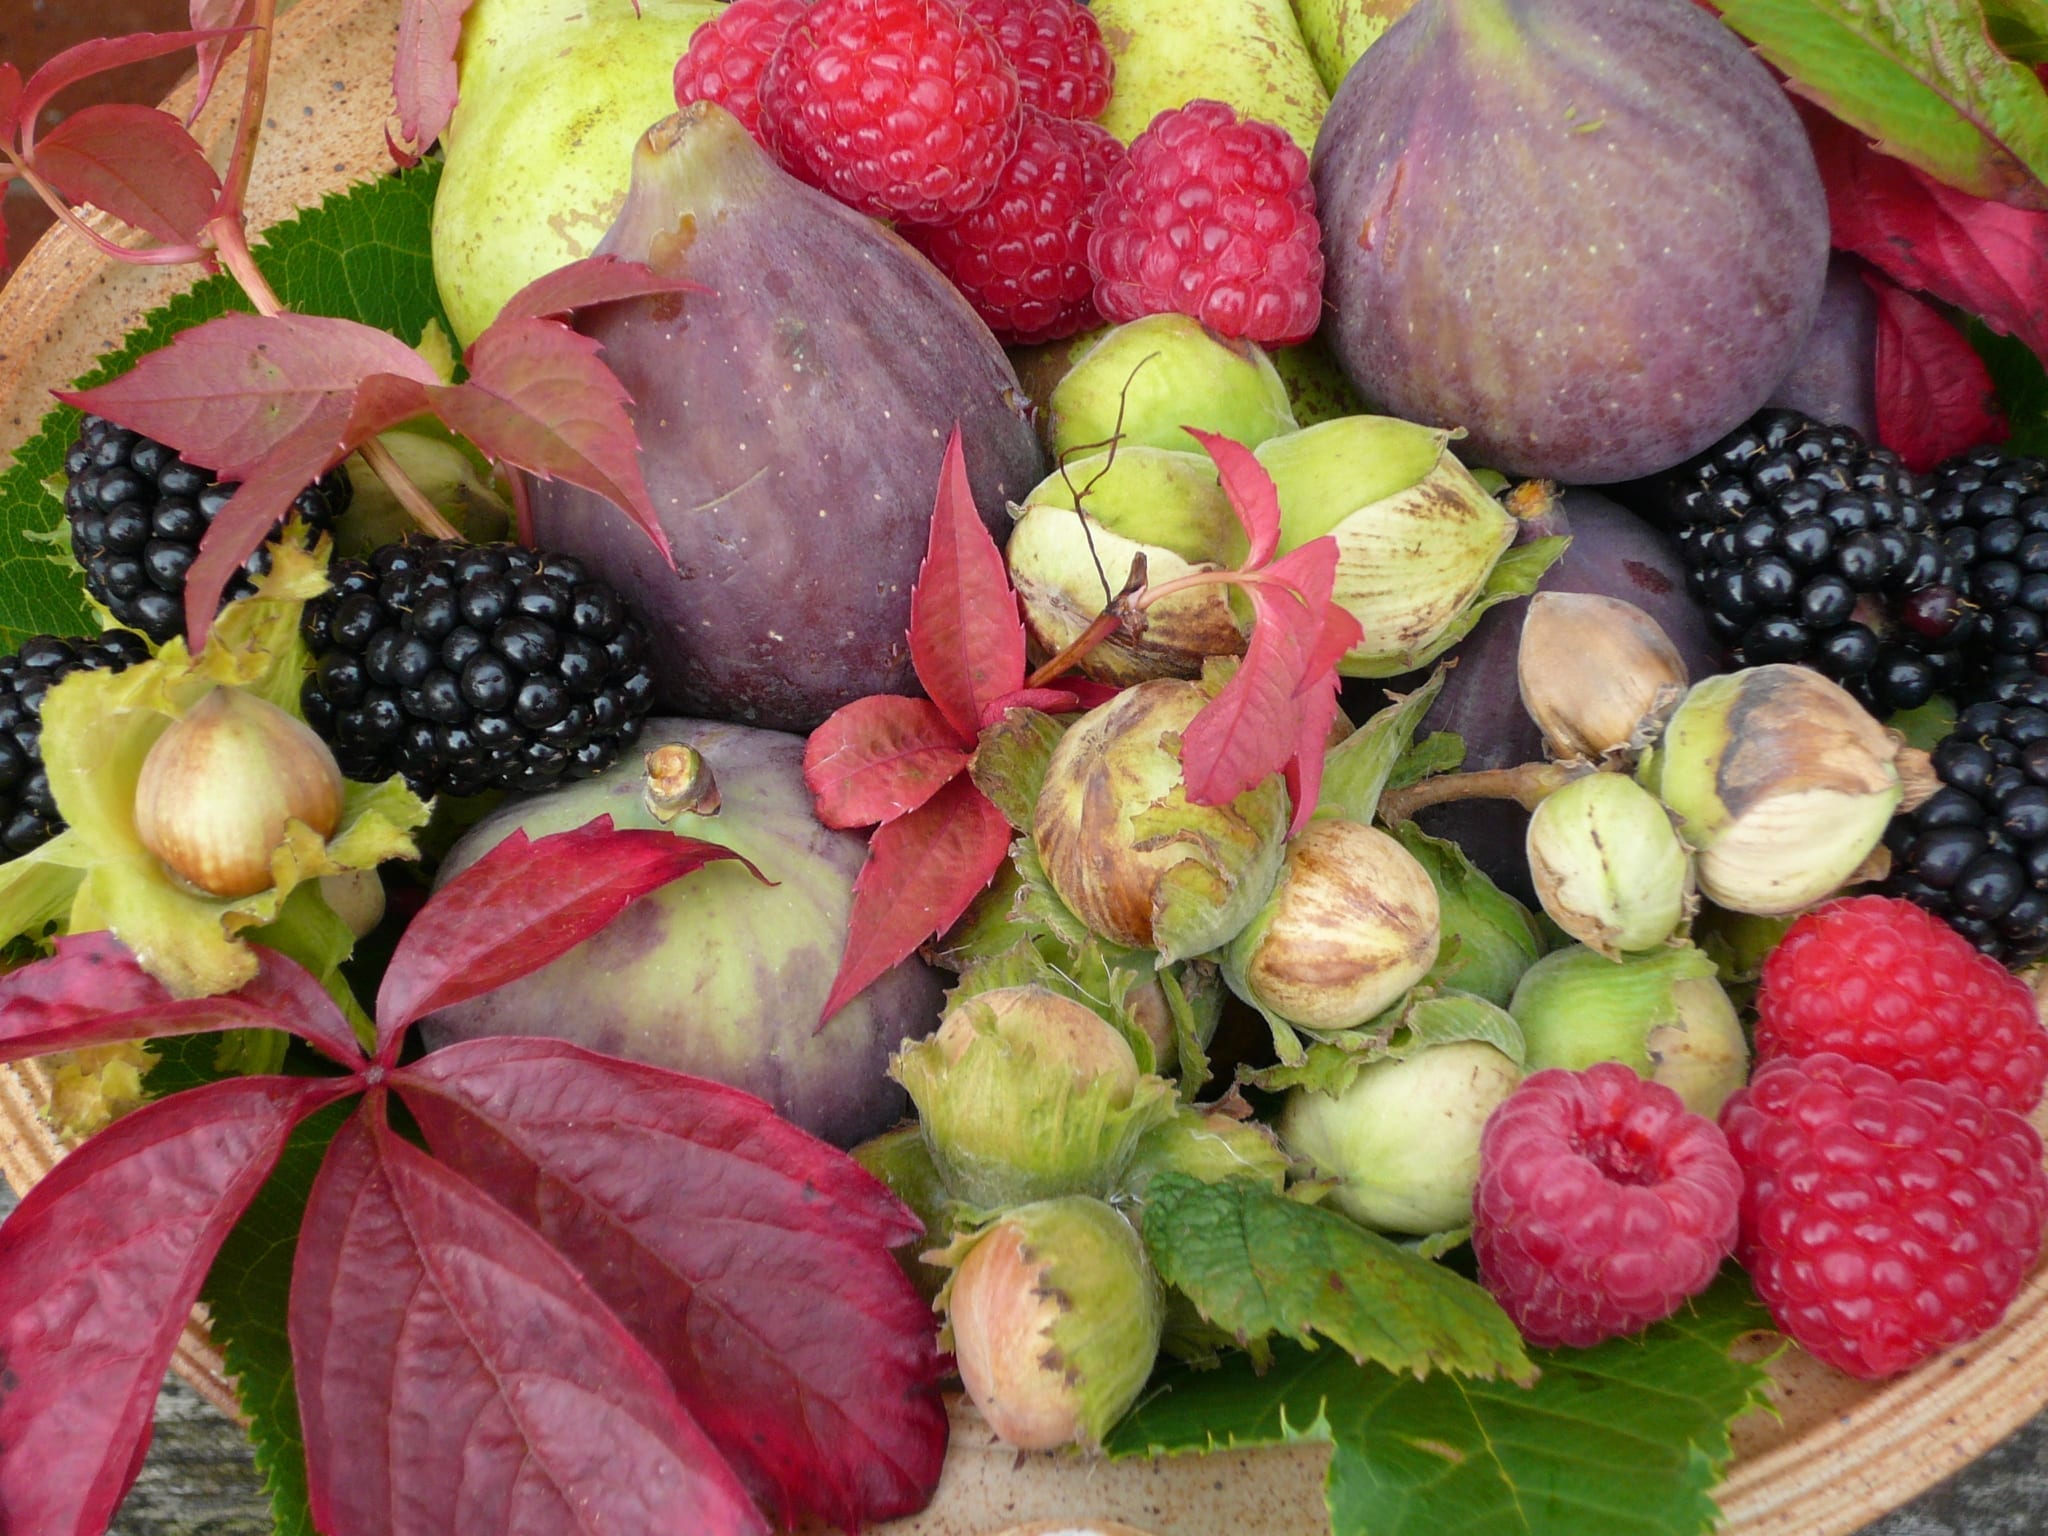 An arrangement of autumn fruits including wild hazelnuts, raspberries, blackberries, figs, pears and decorated with Virginia Creeper